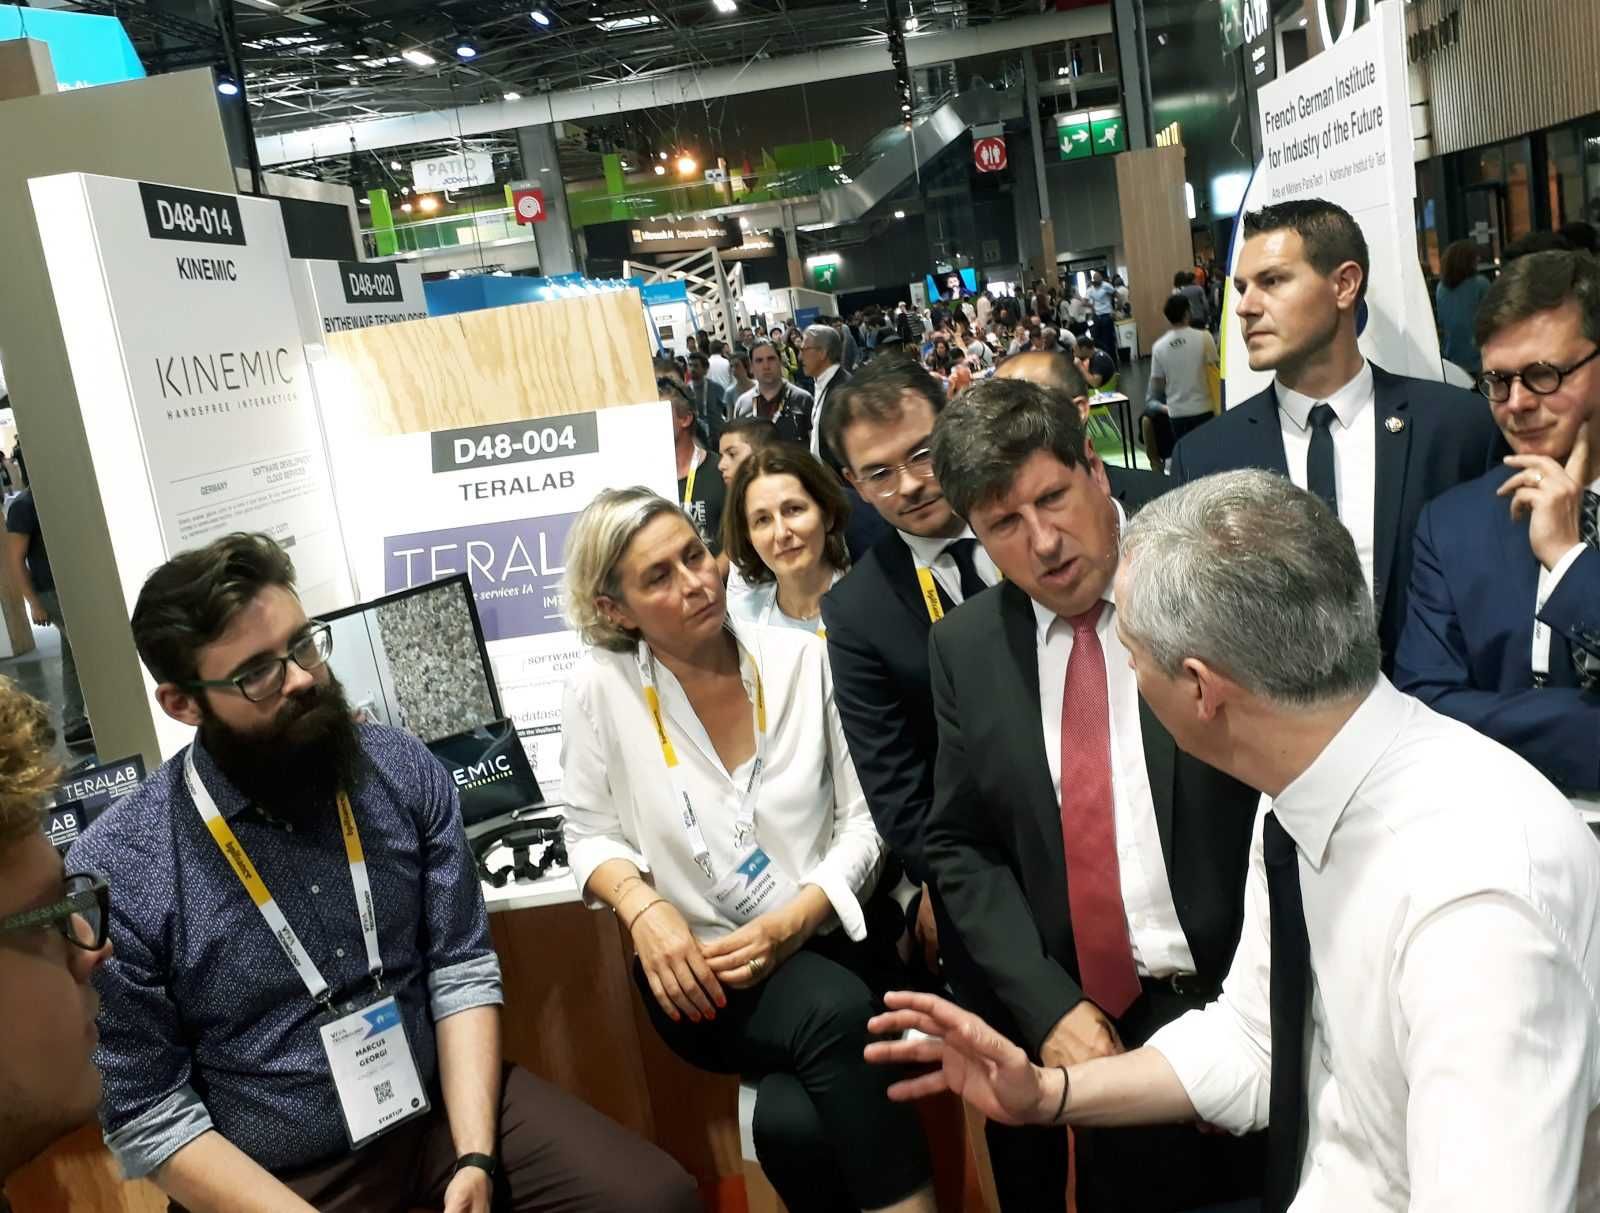 Minister Lemaire am Kinemic-Stand auf der Vivatech